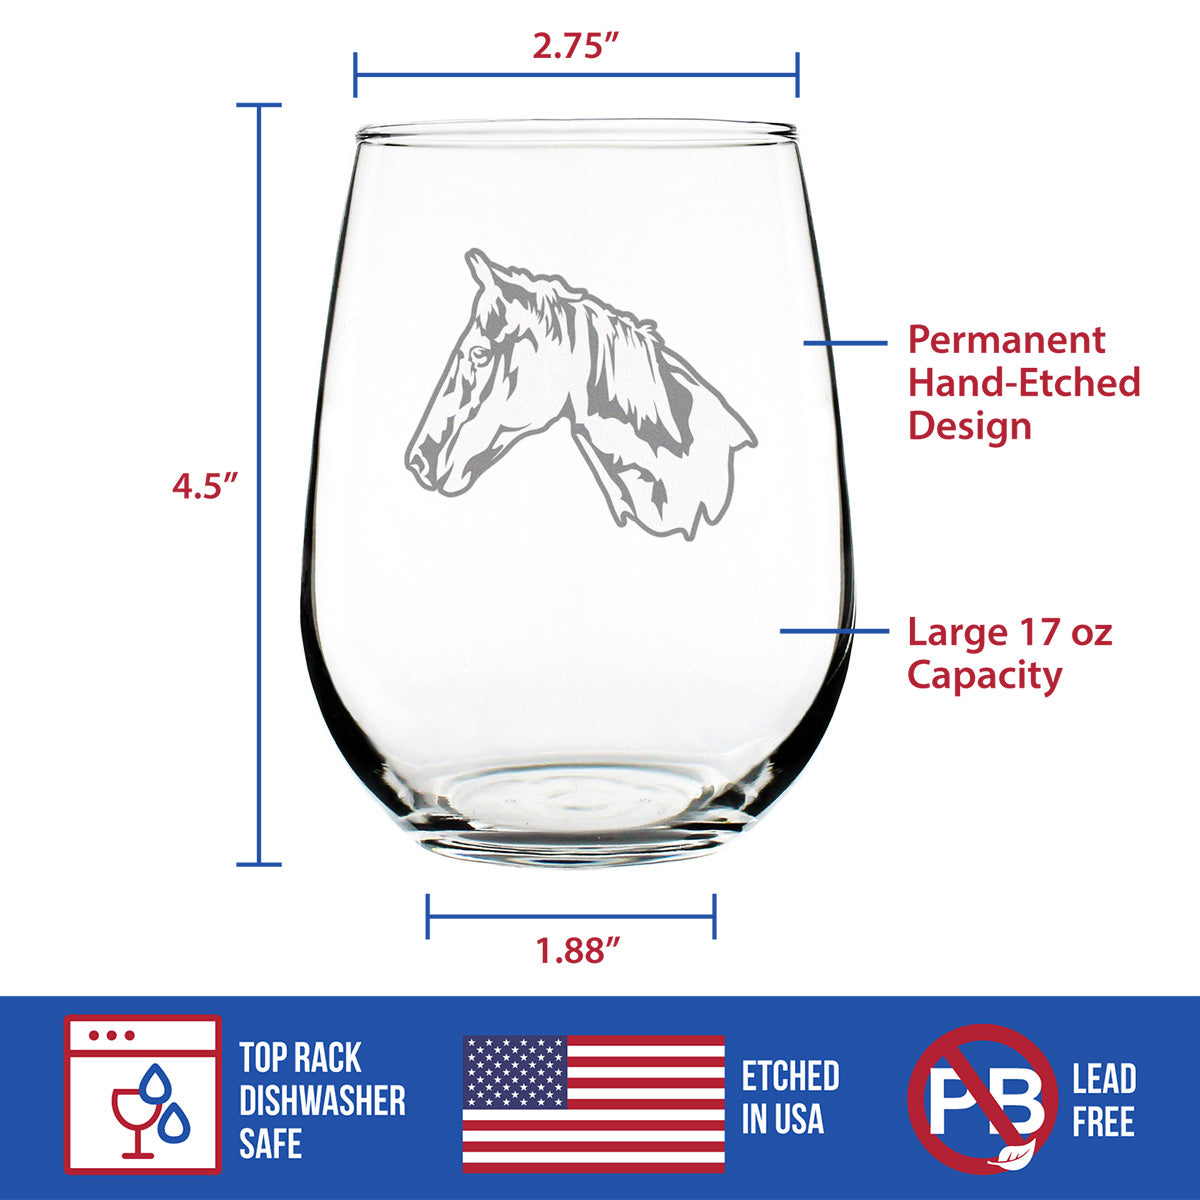 Horse Face Stemless Wine Glass - Western Themed Farm Decor and Gifts for Horseback Riders - Large 17 Oz Glasses